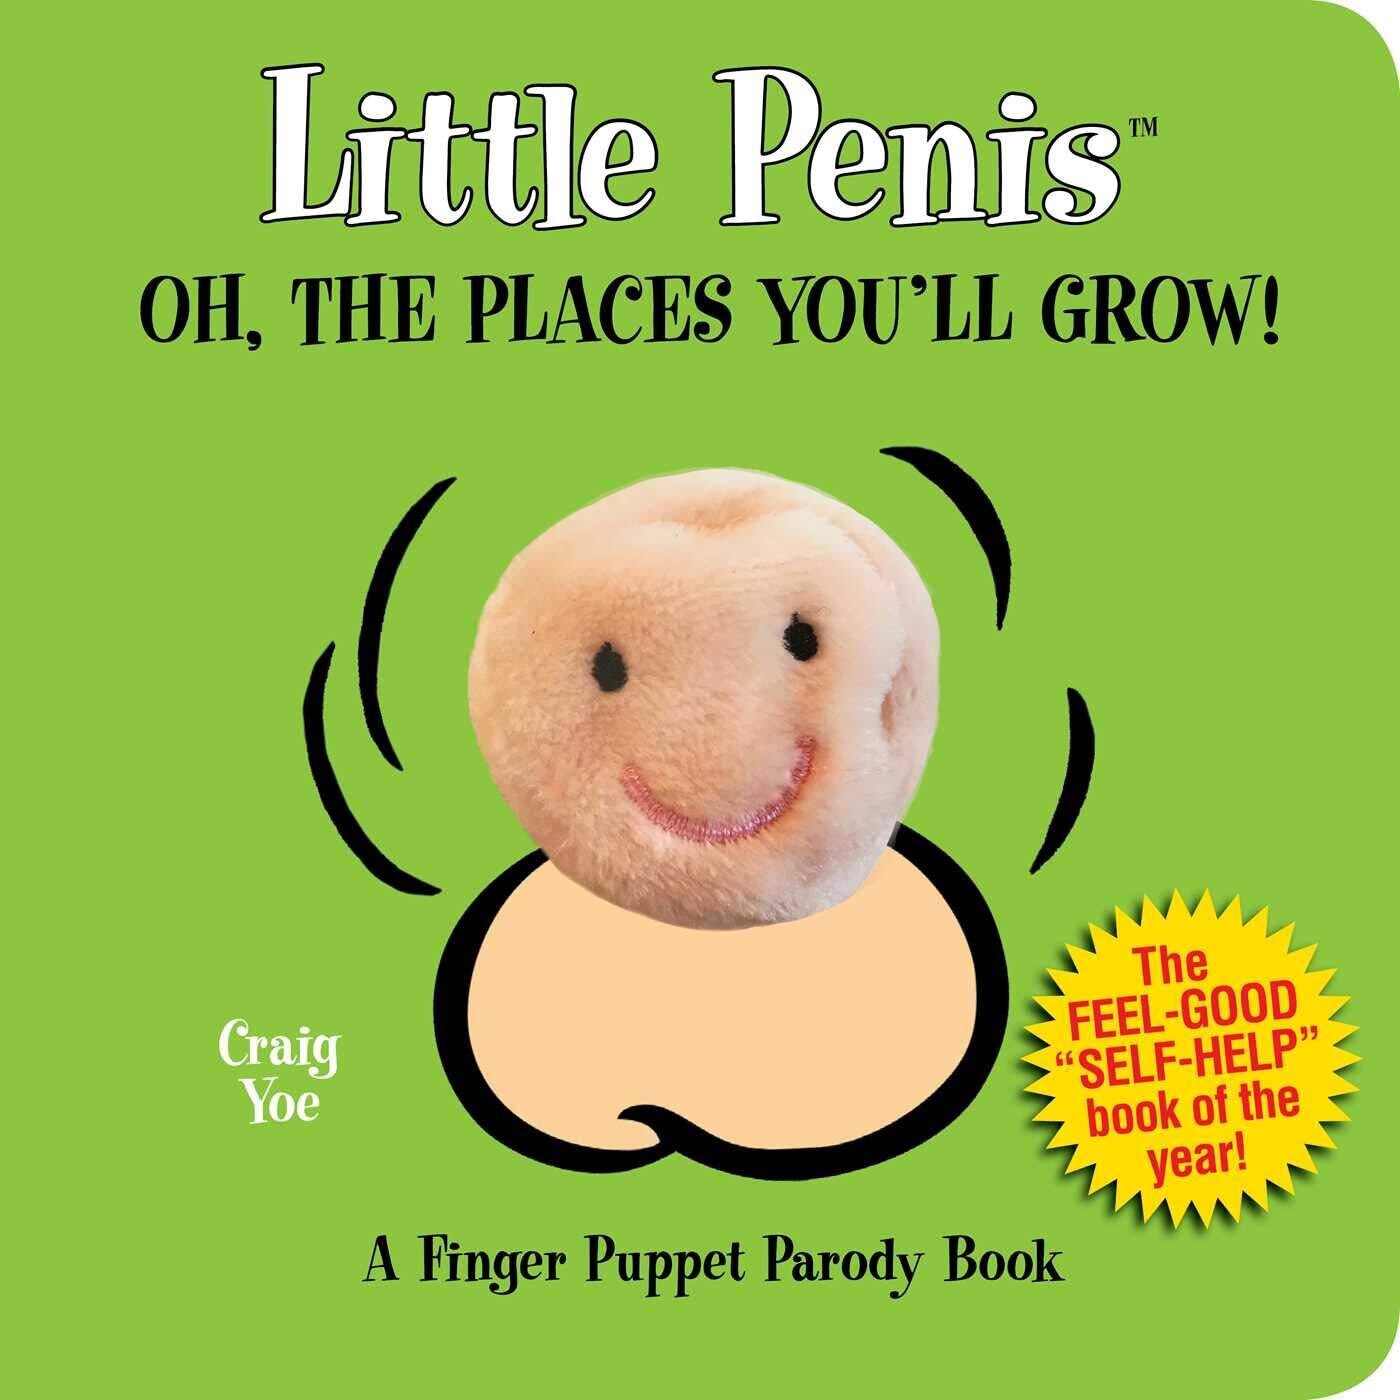 Little Penis - Oh the Places You'll Grow!